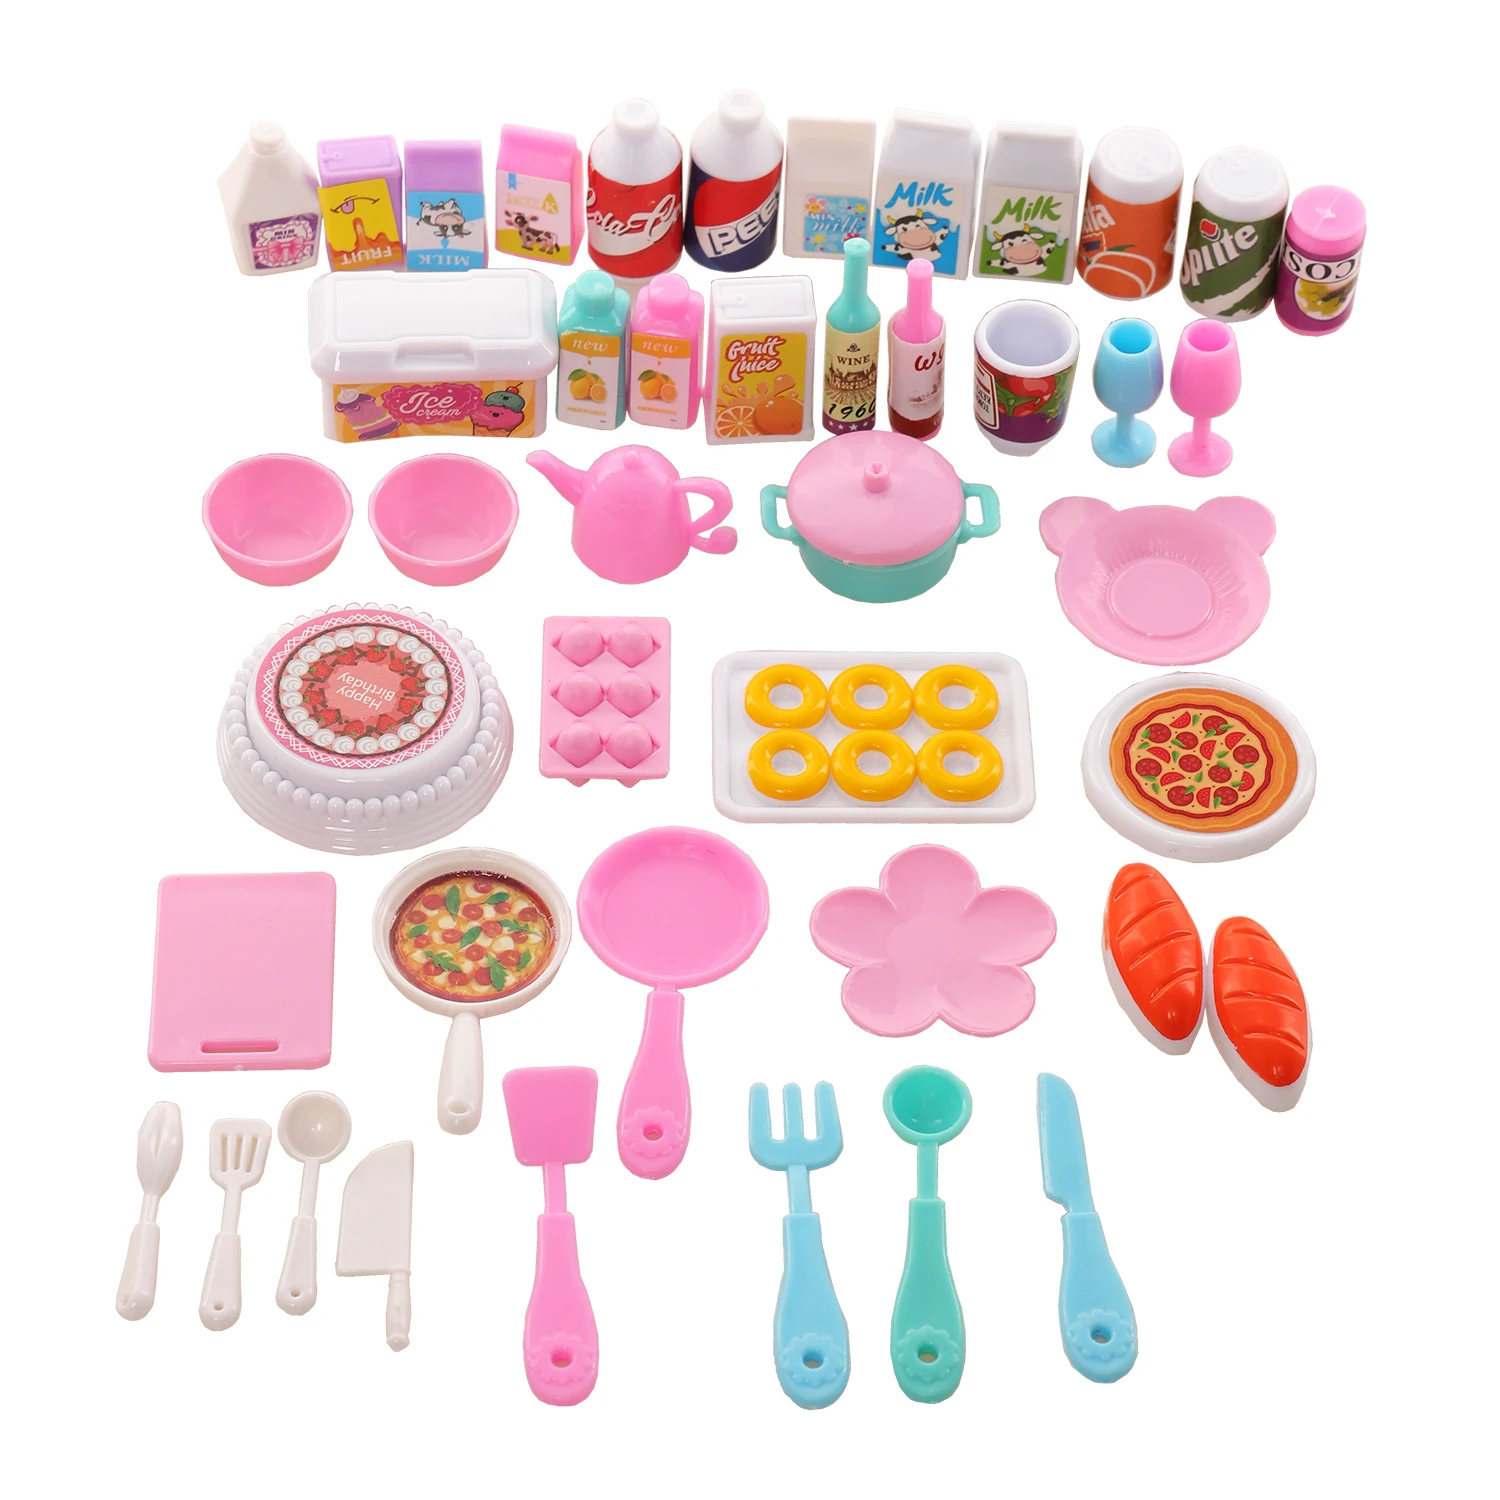 Dollhouse Mini Kitchen Food for Barbie 43 Pcs Dinner Set Fork Knif Plate Pizza Soup Tableware Cute Kids Toys Doll Accessories